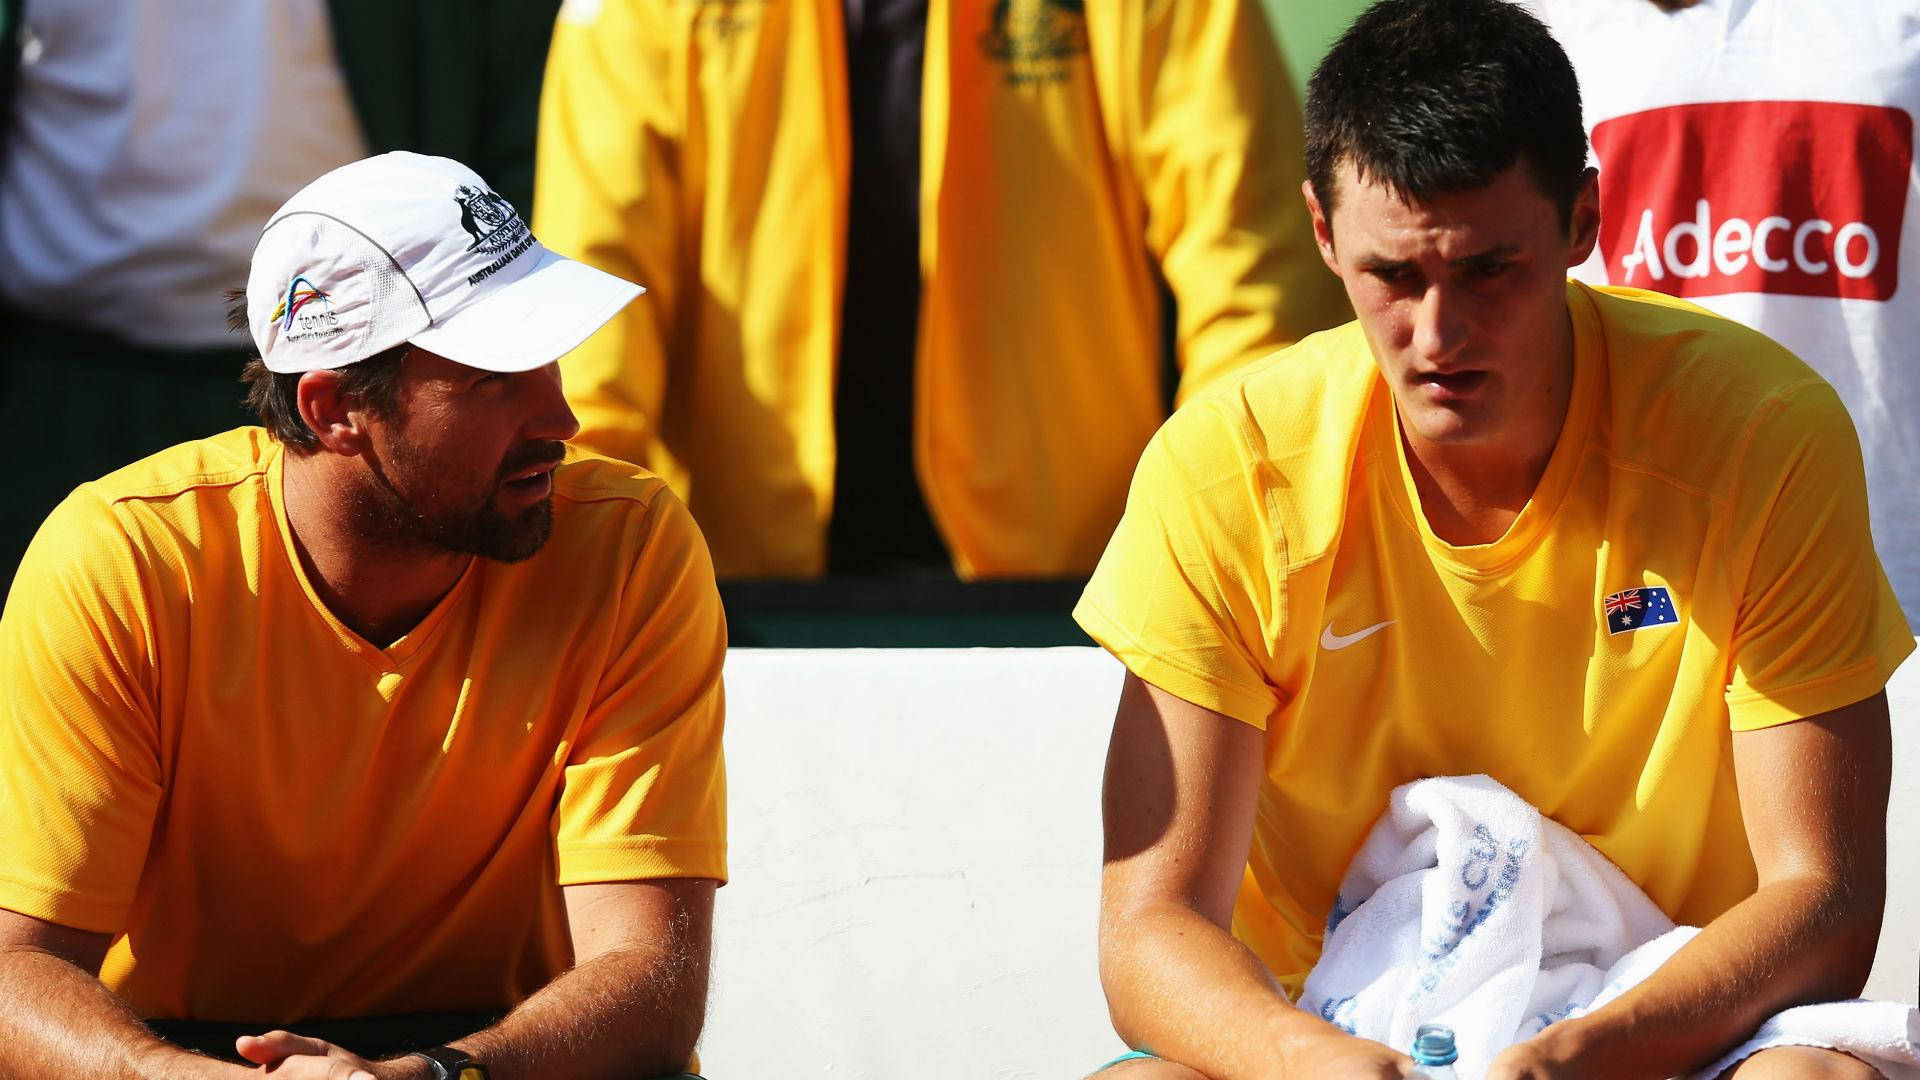 Tennis Legends - Patrick Rafter and Bernard Tomic in candid discussion on the court Wallpaper